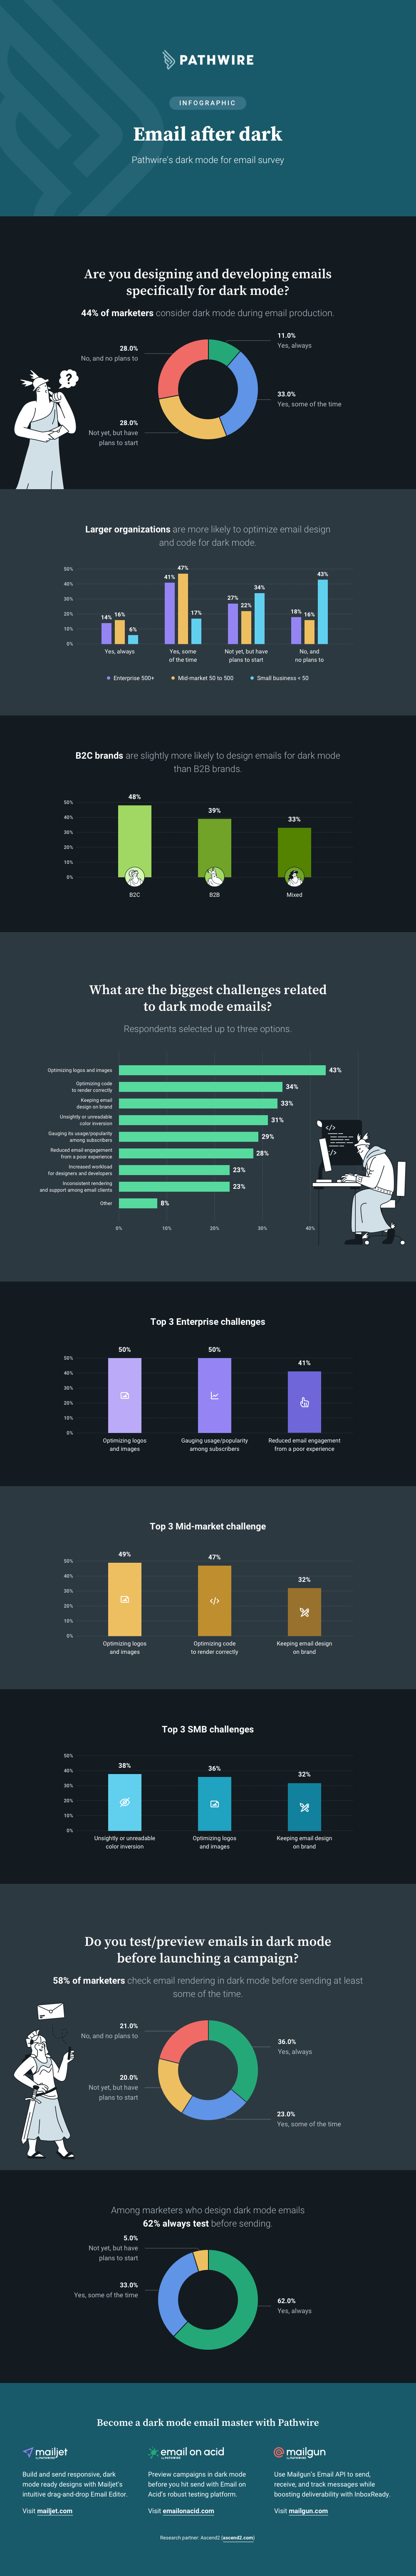 Dark mode email challenges survey results infographic